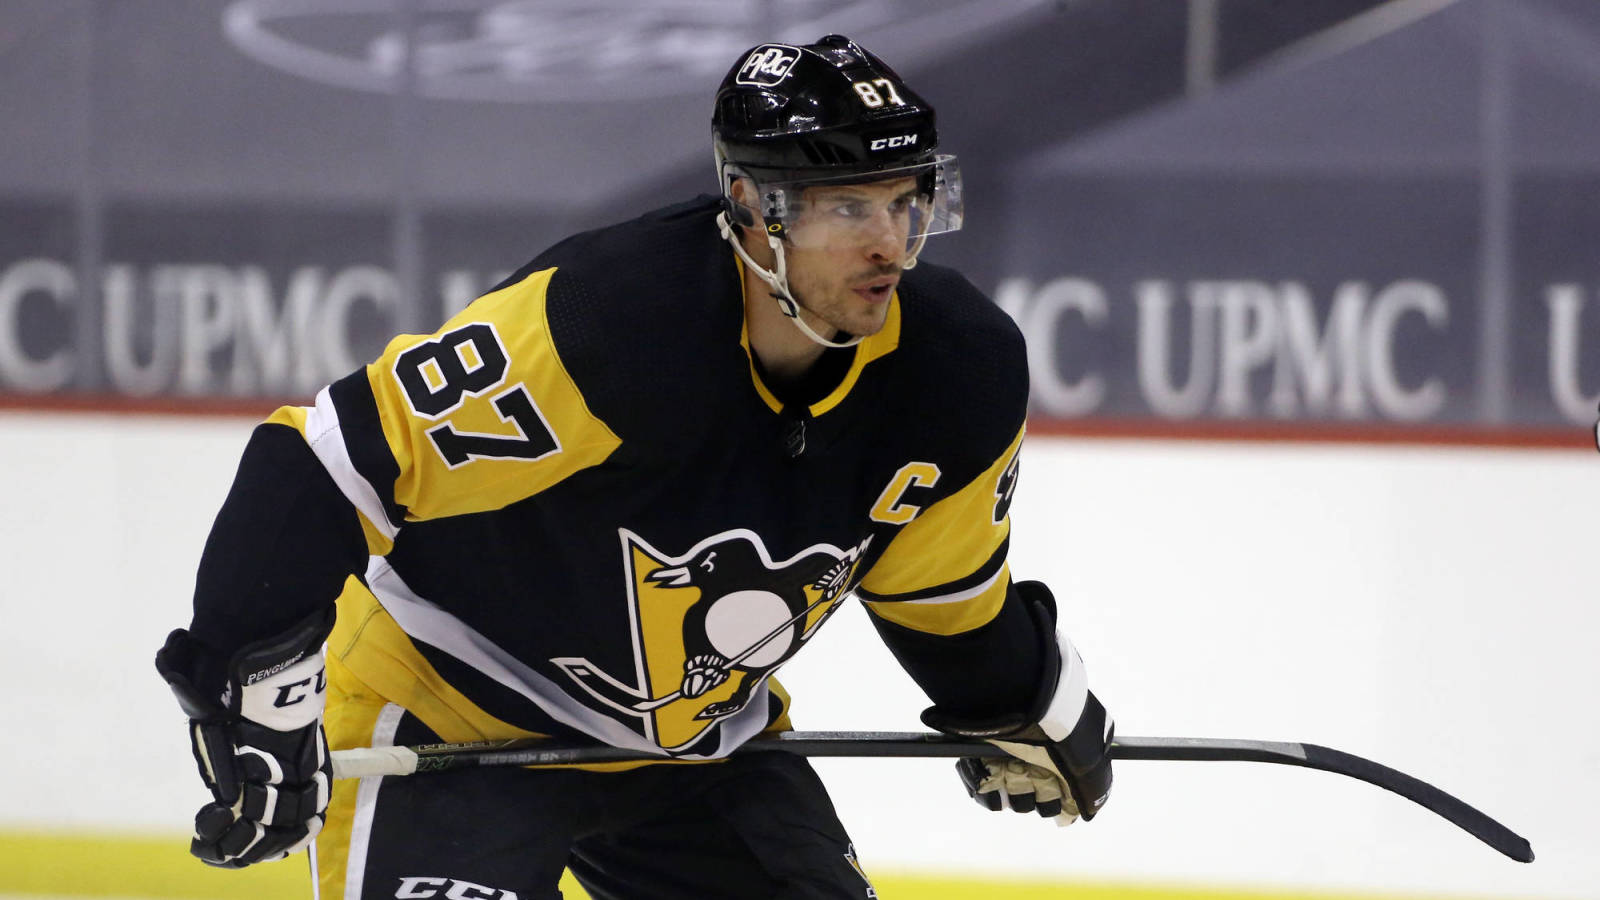 Crosby clinches 16th point-per-game season, trailing Gretzky and